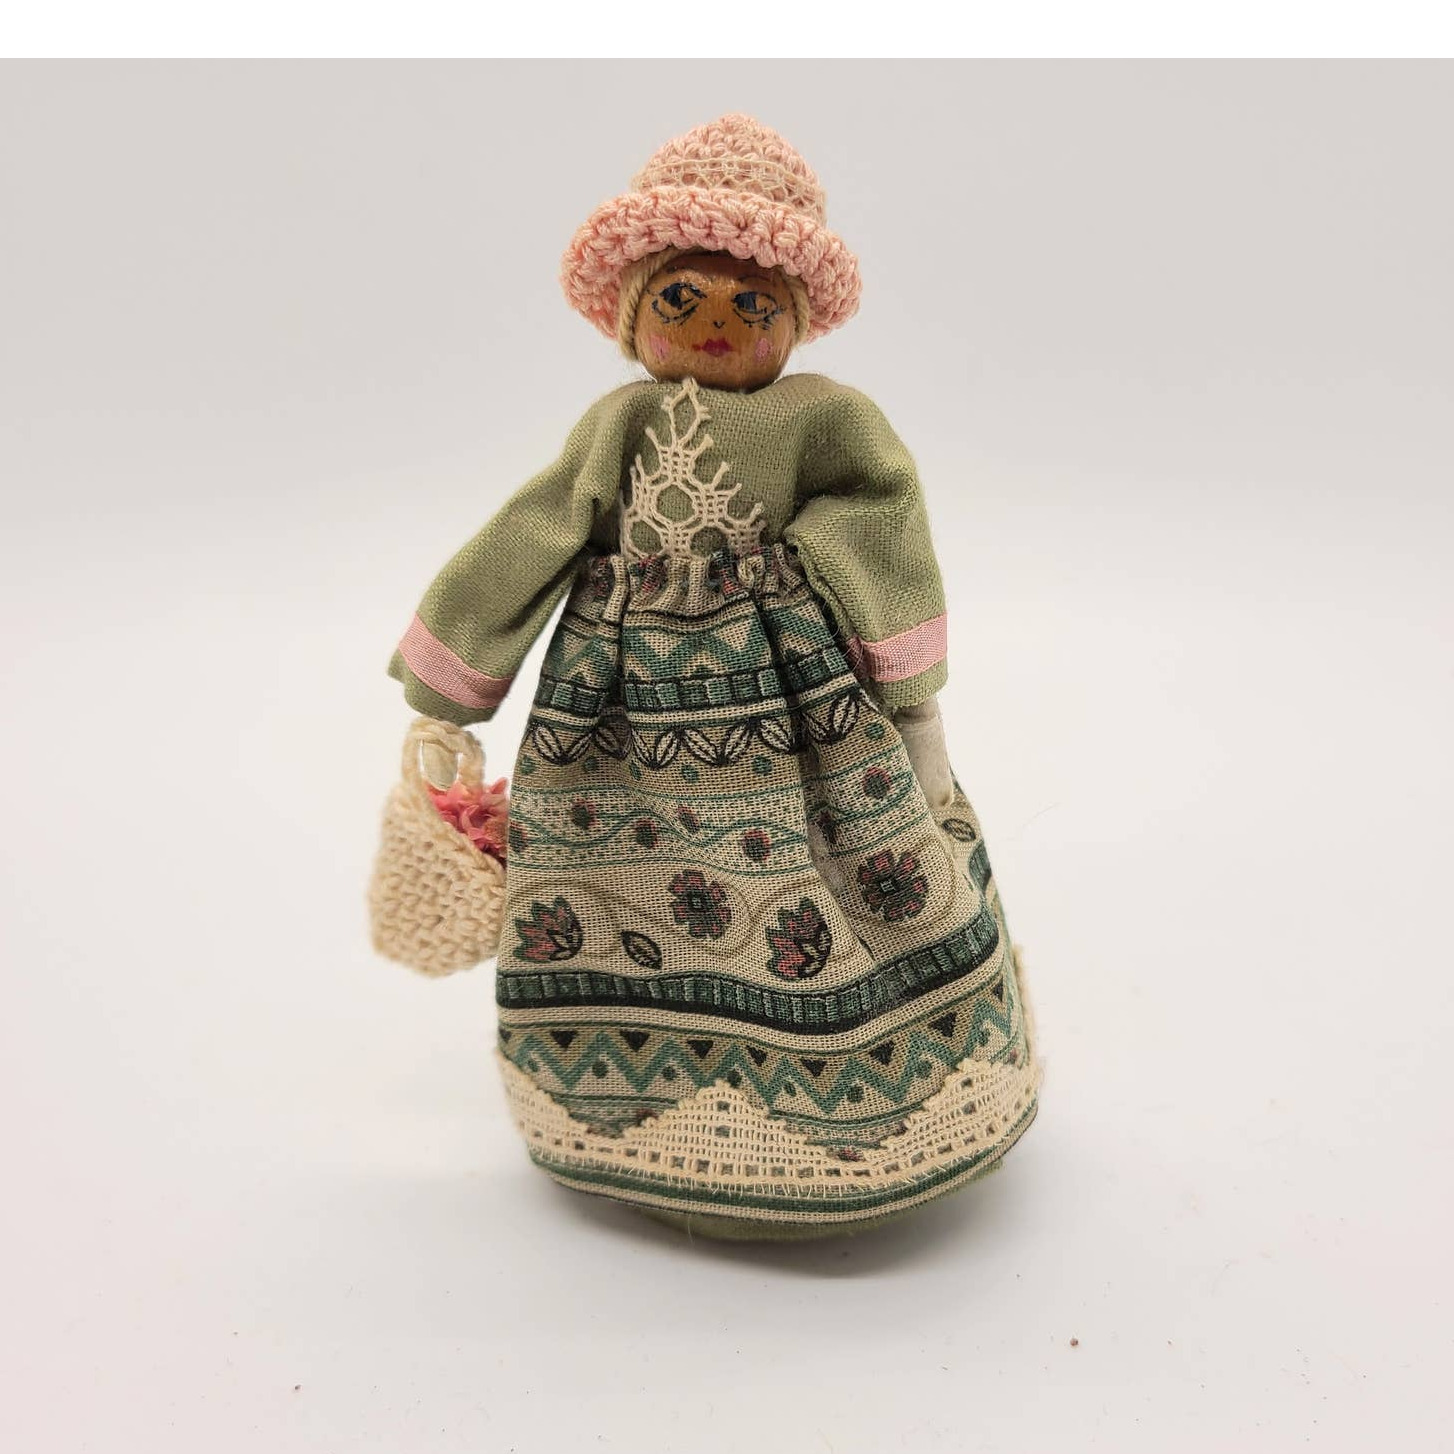 Handmade Doll Signed Wood and Crochet